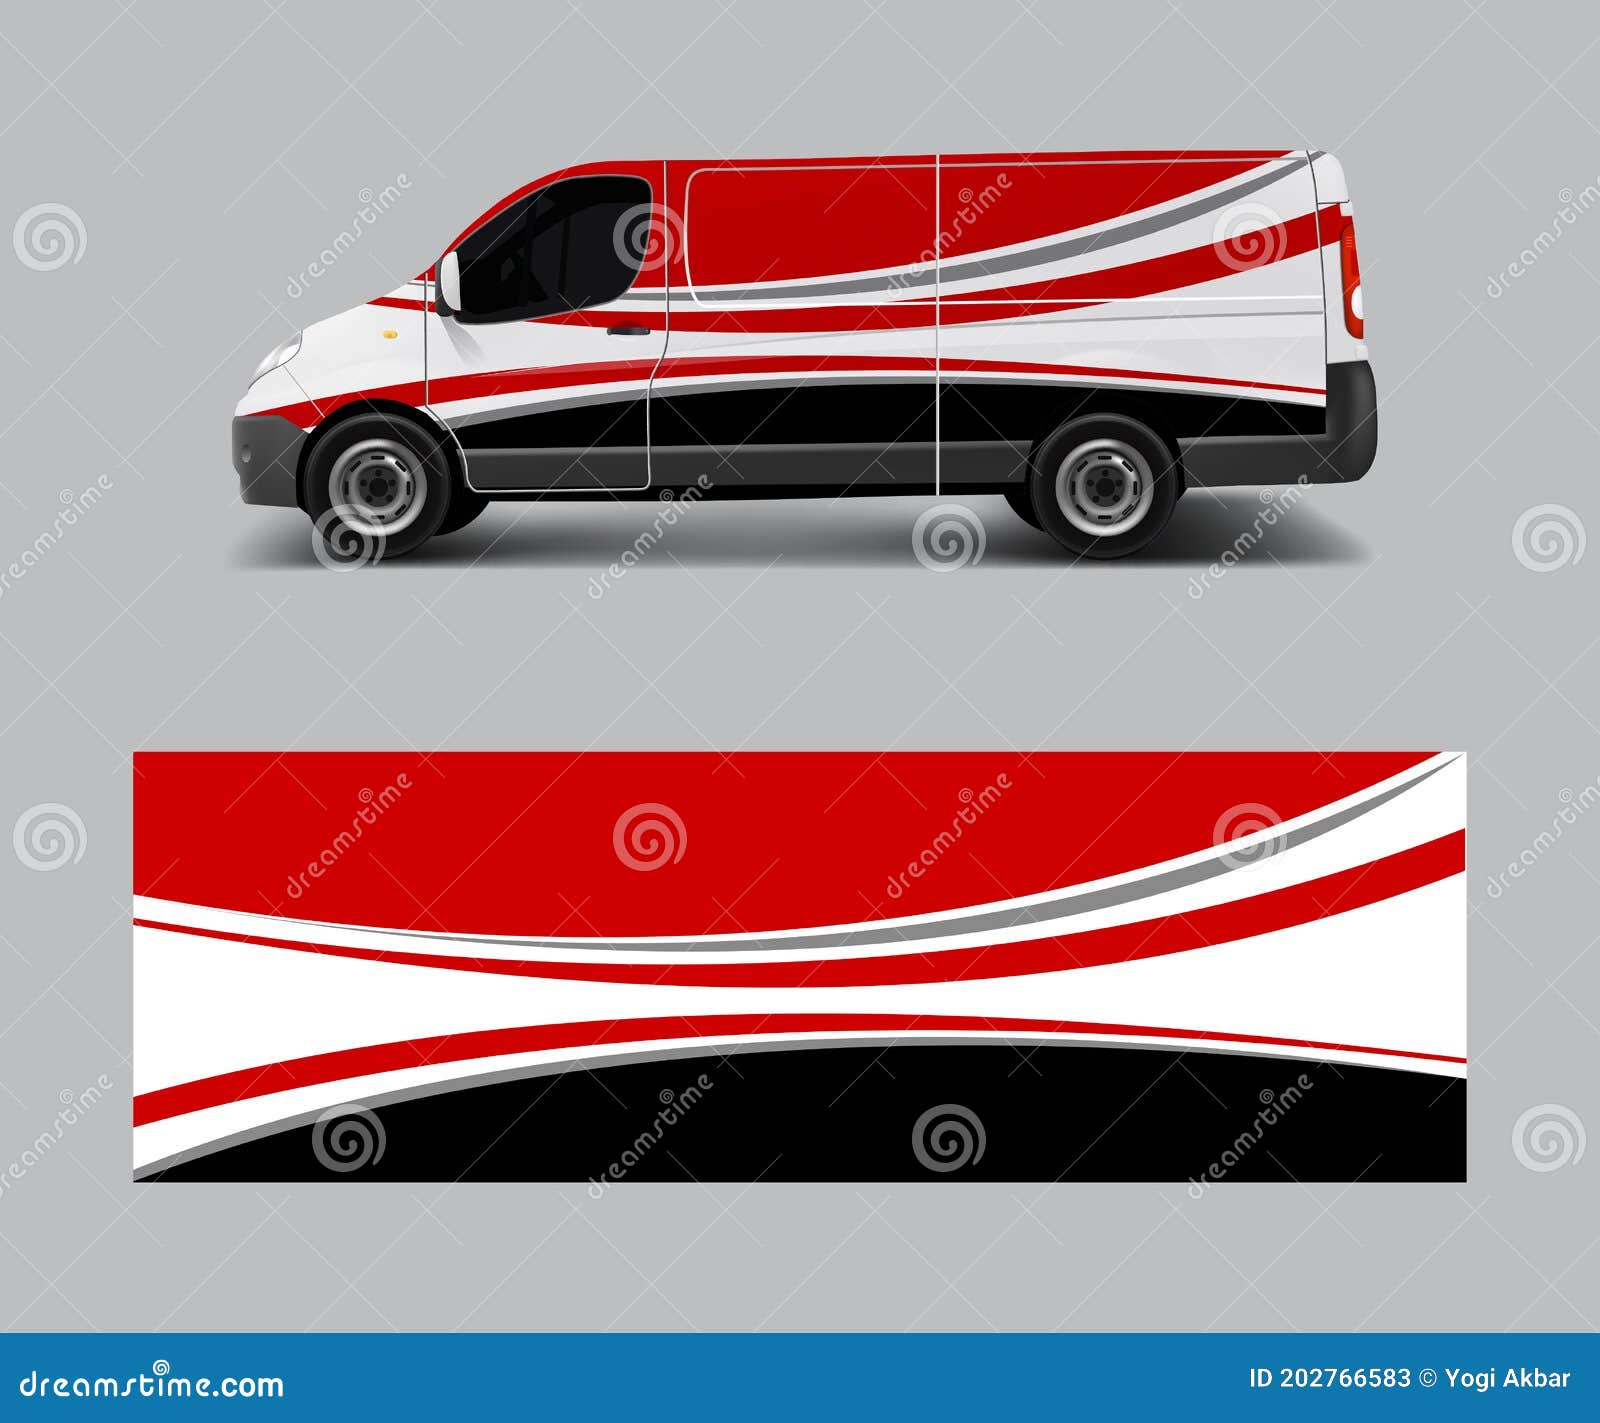 Van Wrap Design Template Vector With Wave Shapes, Decal, Wrap, And